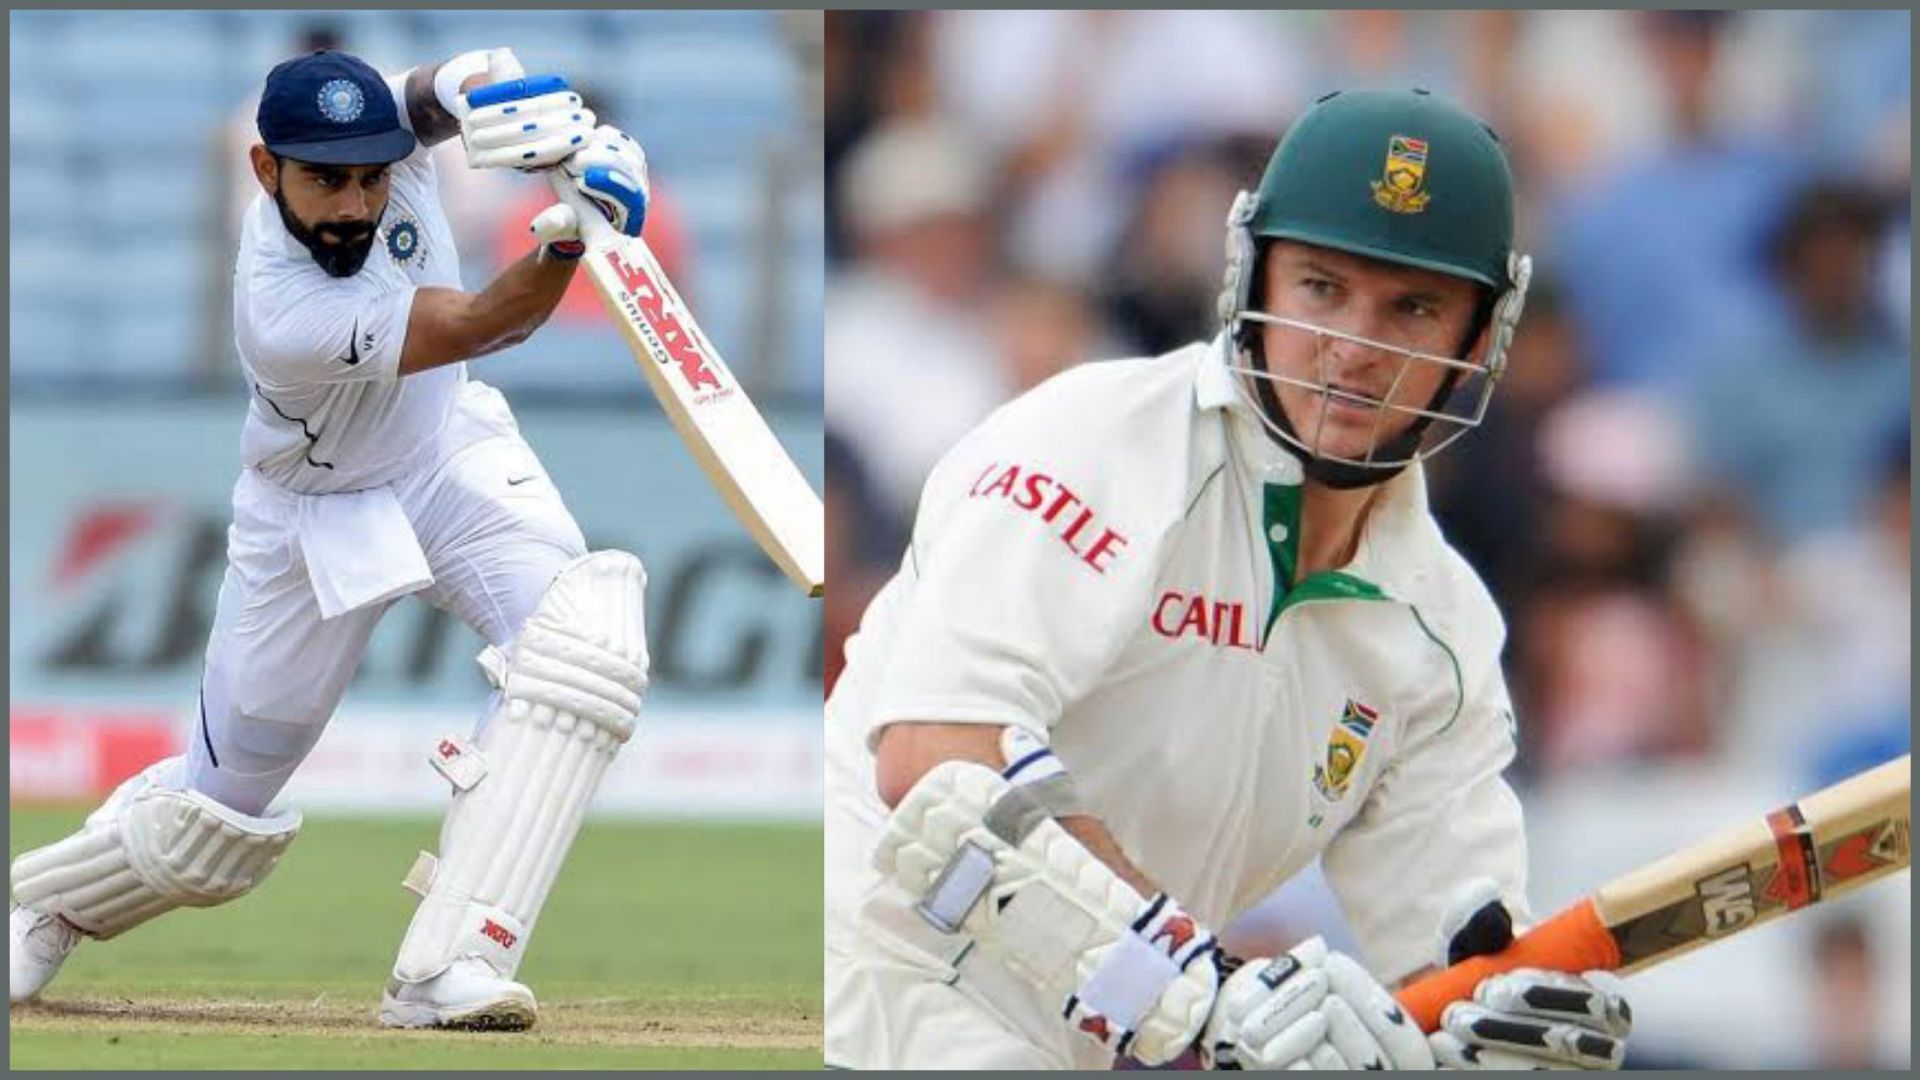 Virat Kohli (L) and Graeme Smith (R) have been very successful captains in the Test format